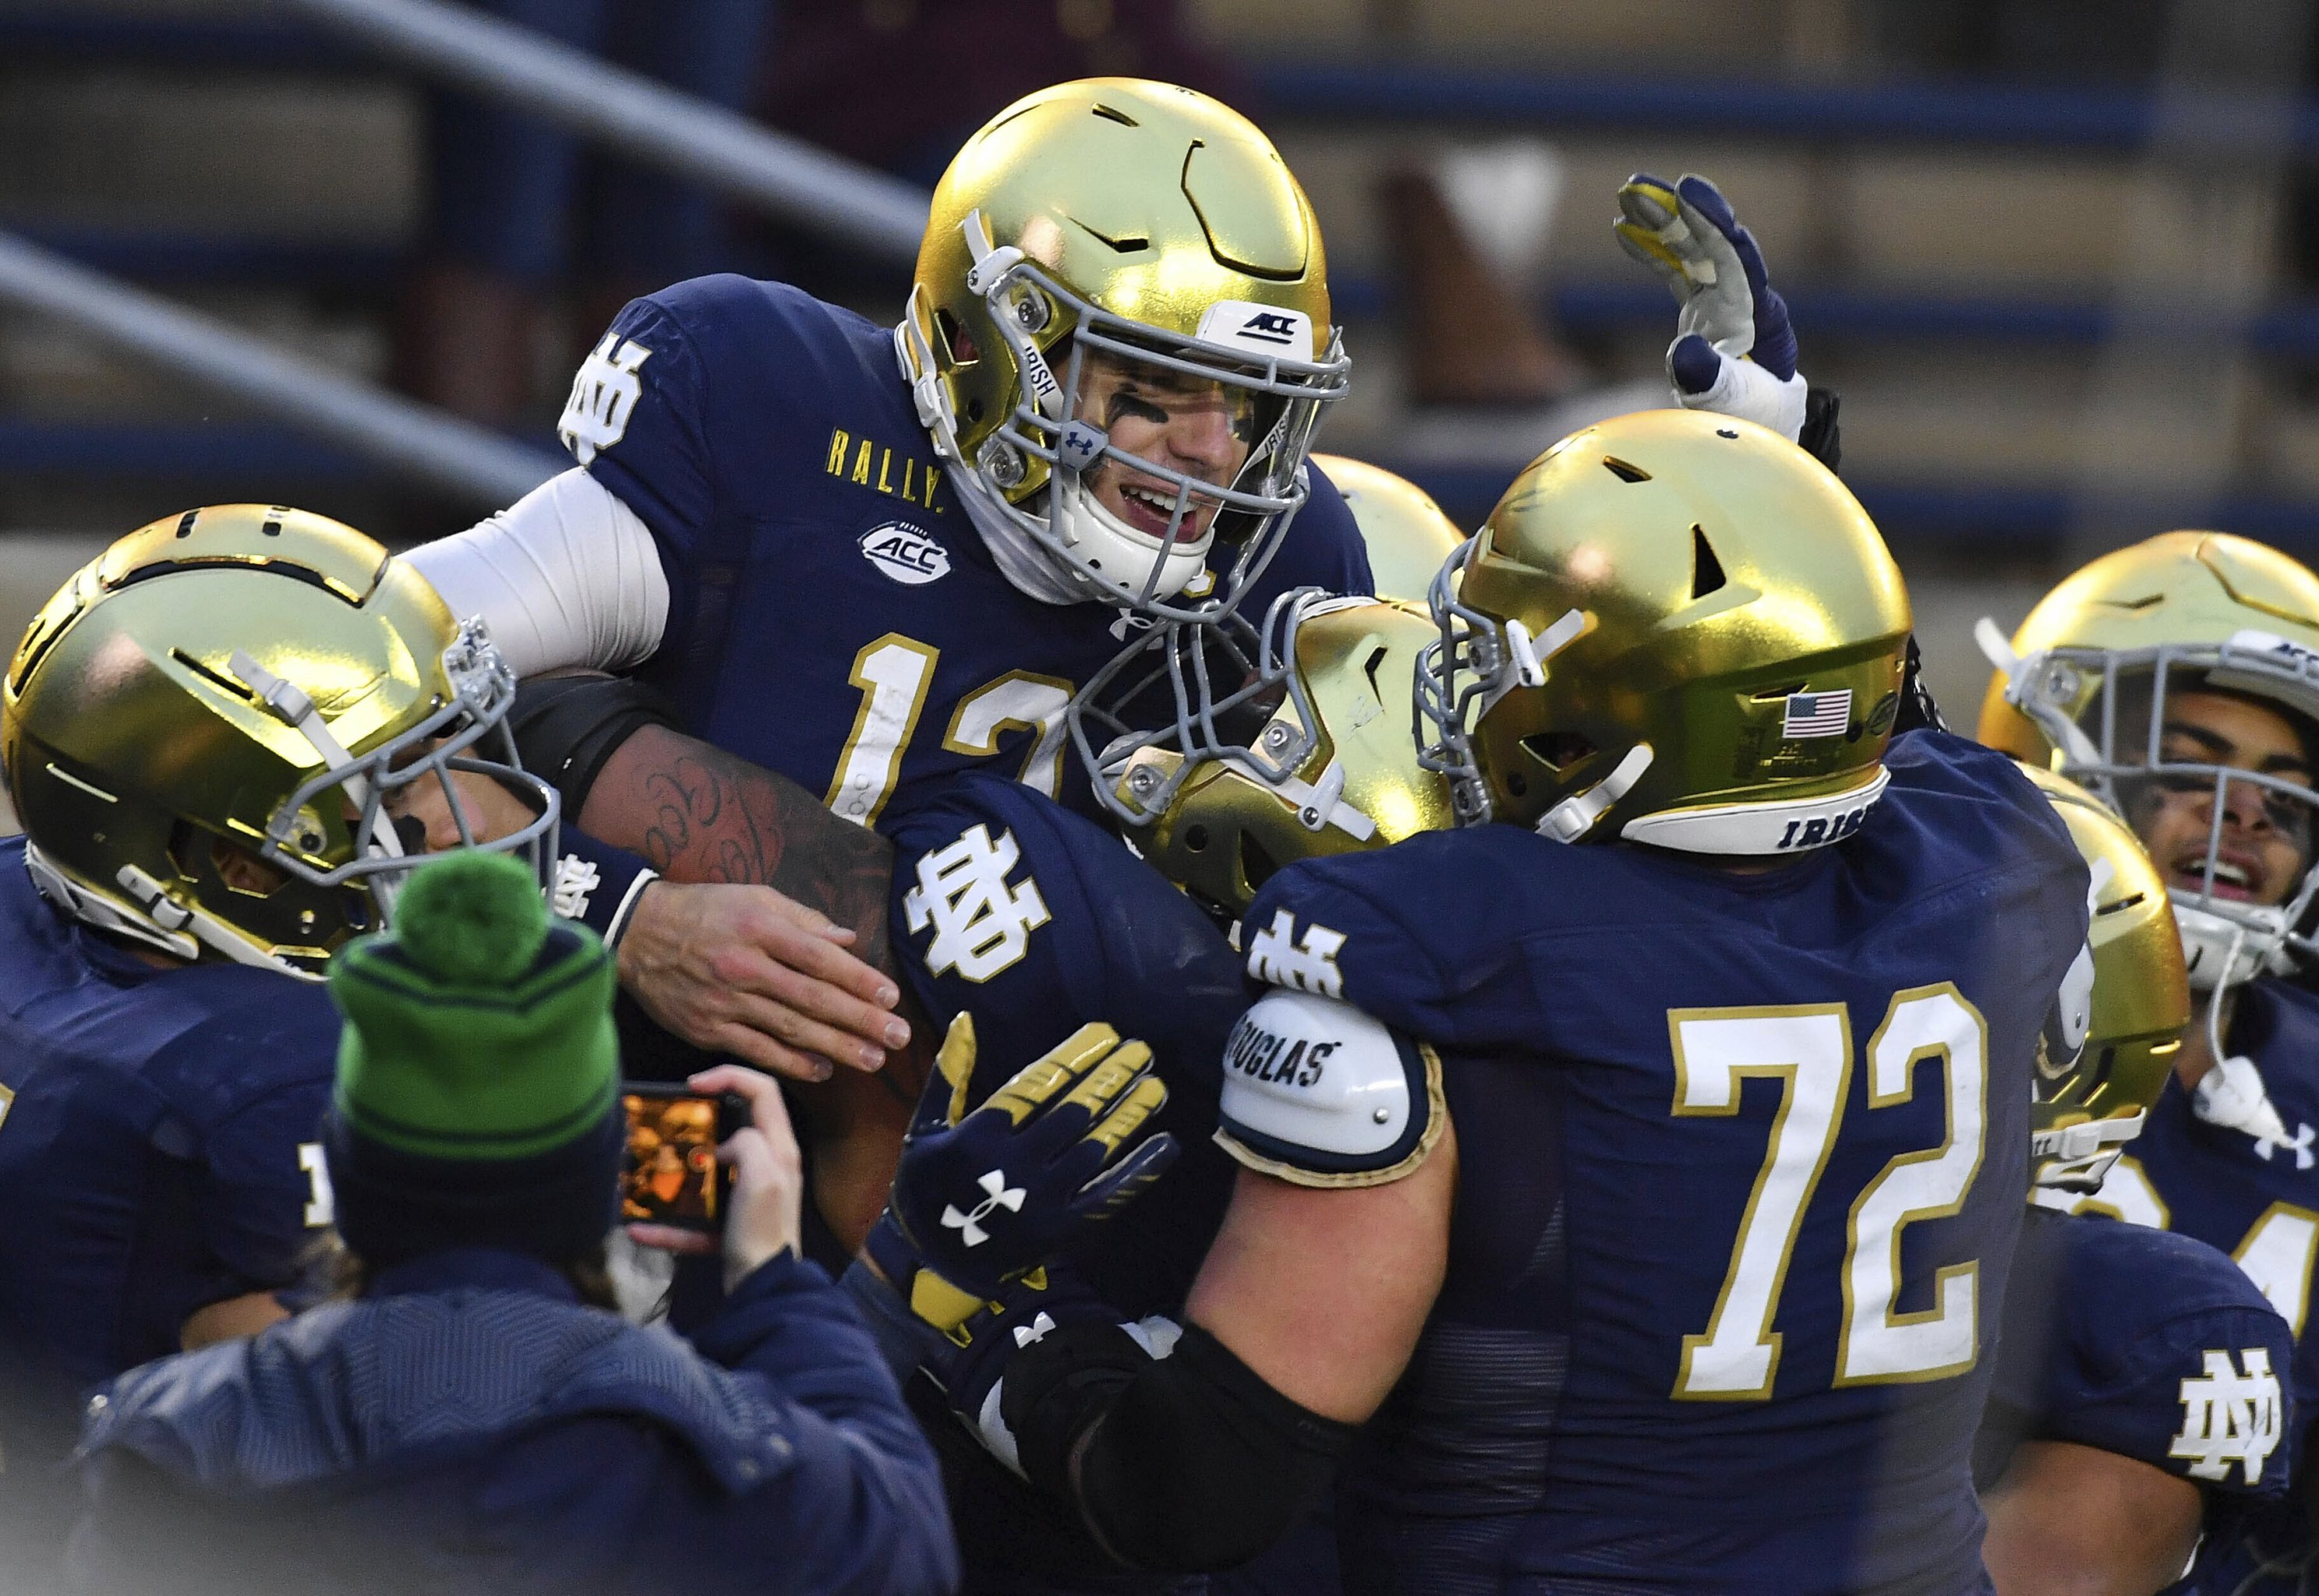 Notre Dame quarterback Ian Book runs out of the pocket in the 2nd